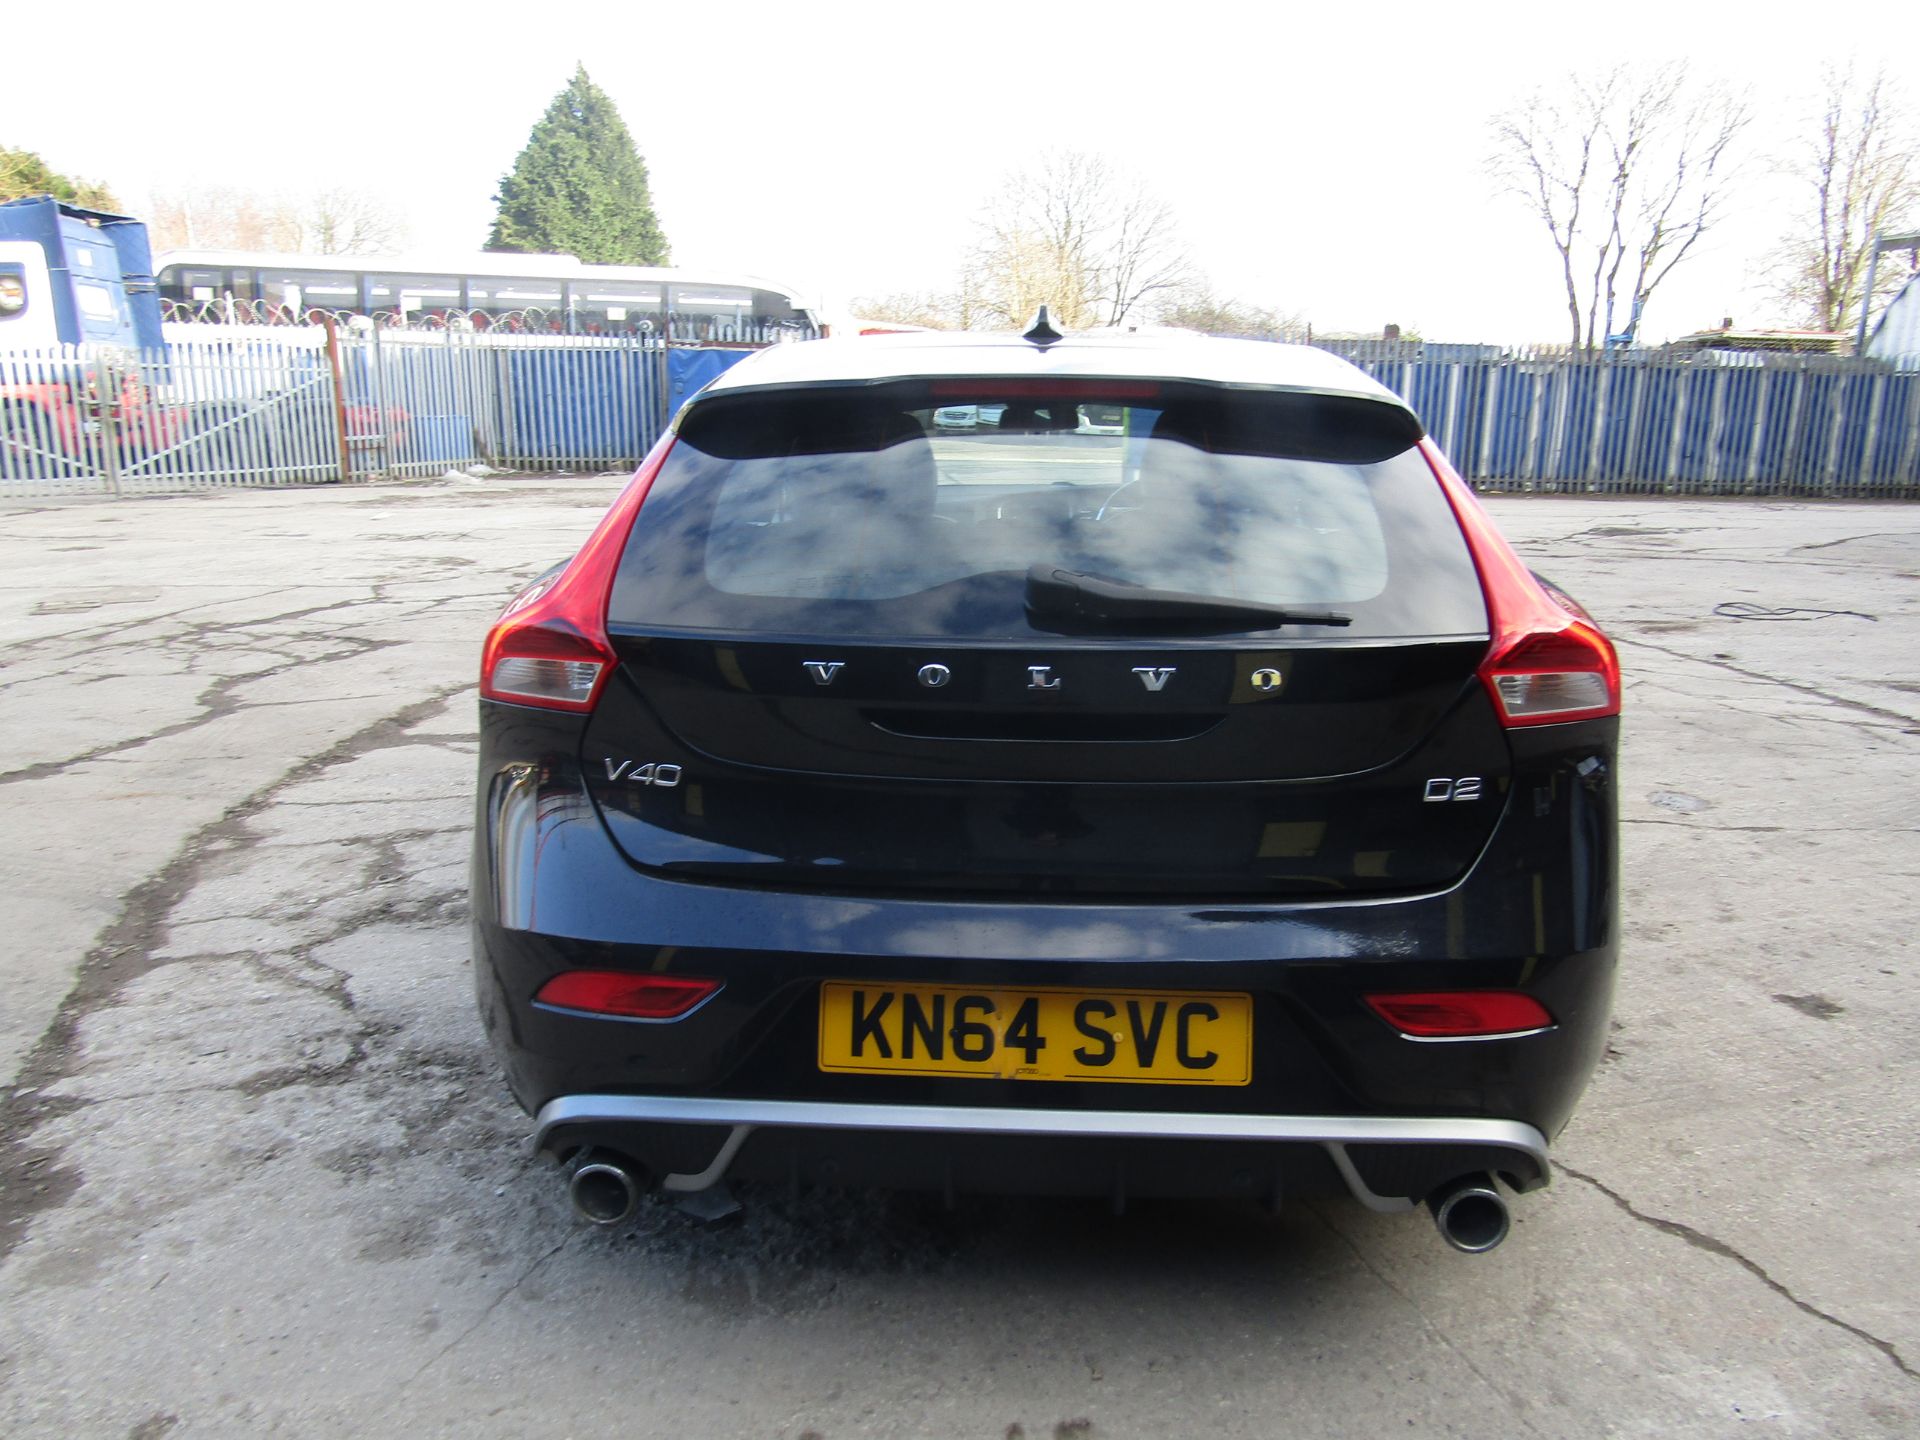 Buyers Special 10% Commissionÿ 2014 Volvo V40 Nav D2 R design, 60531 miles (unchecked) MOT until - Image 3 of 23